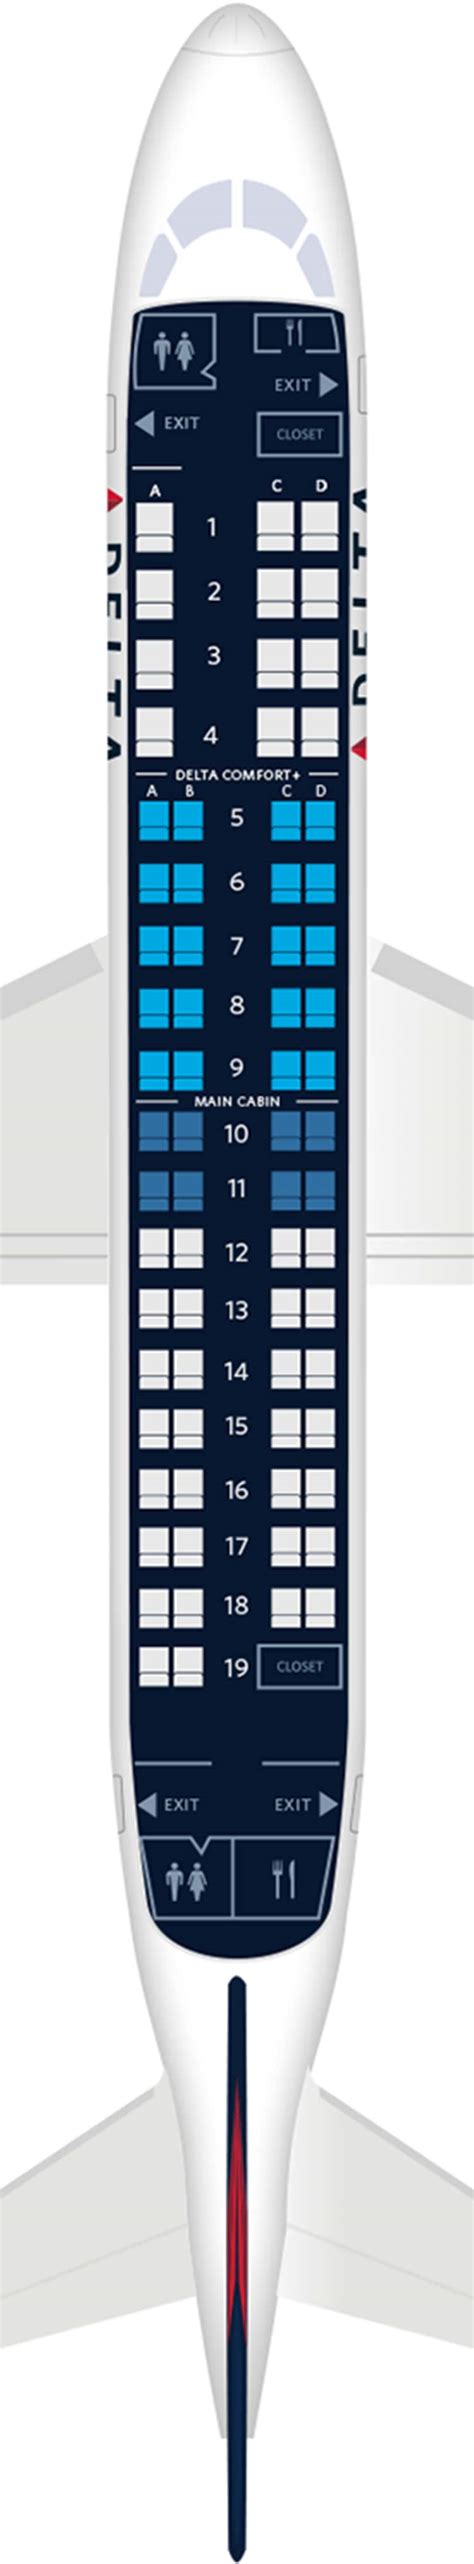 Aa 175 seat map. Alaska’s E75 service is operated by partners Horizon and SkyWest. Embraer created the E-175 to operate on short to mid-range flight routes. One of the primary factors of the aircraft’s design features seating arrangements with no middle seats allowing every passenger to have either a window or aisle seat. 